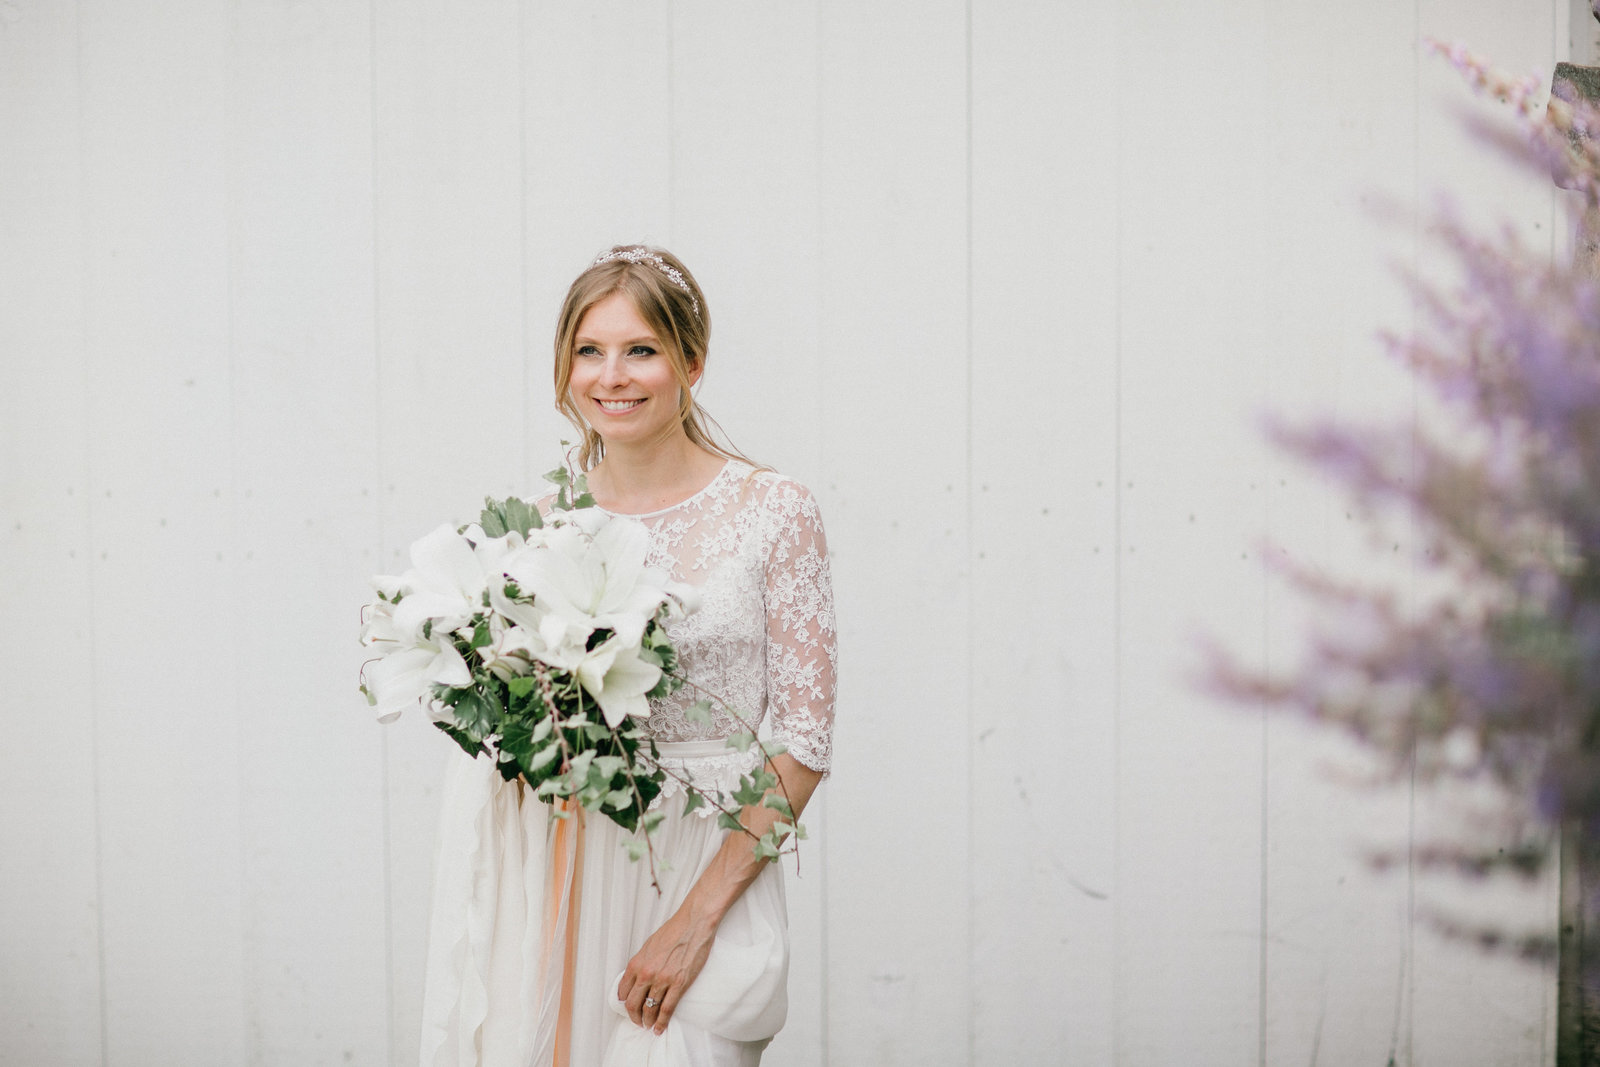 Beautiful bride photographed with her gorgeous white lily bouquet from Wild Stems.